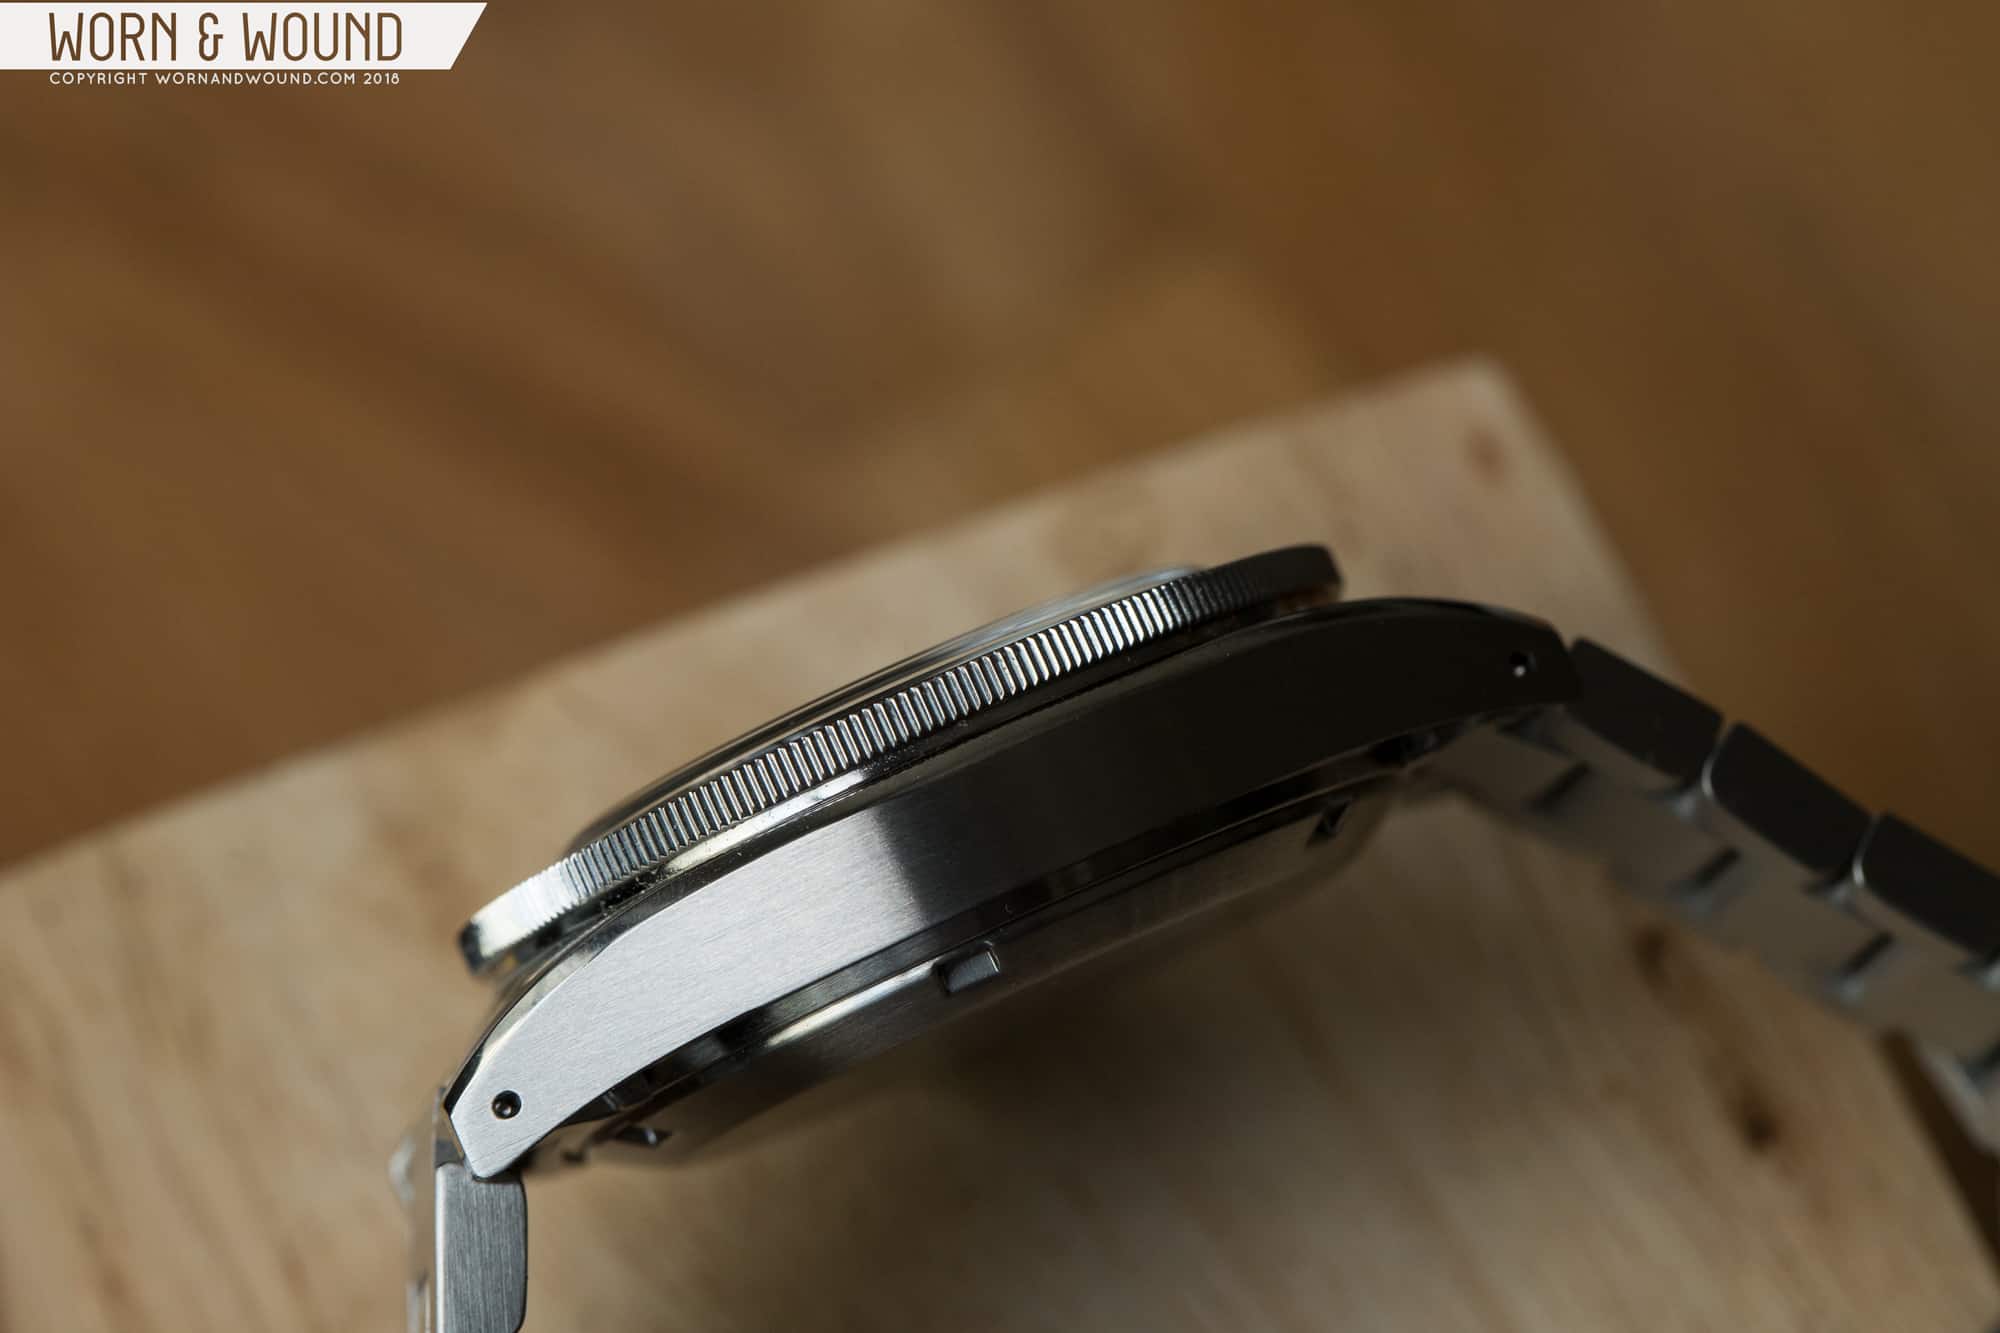 Lorier Neptune SIII Watch Review - WatchReviewBlog